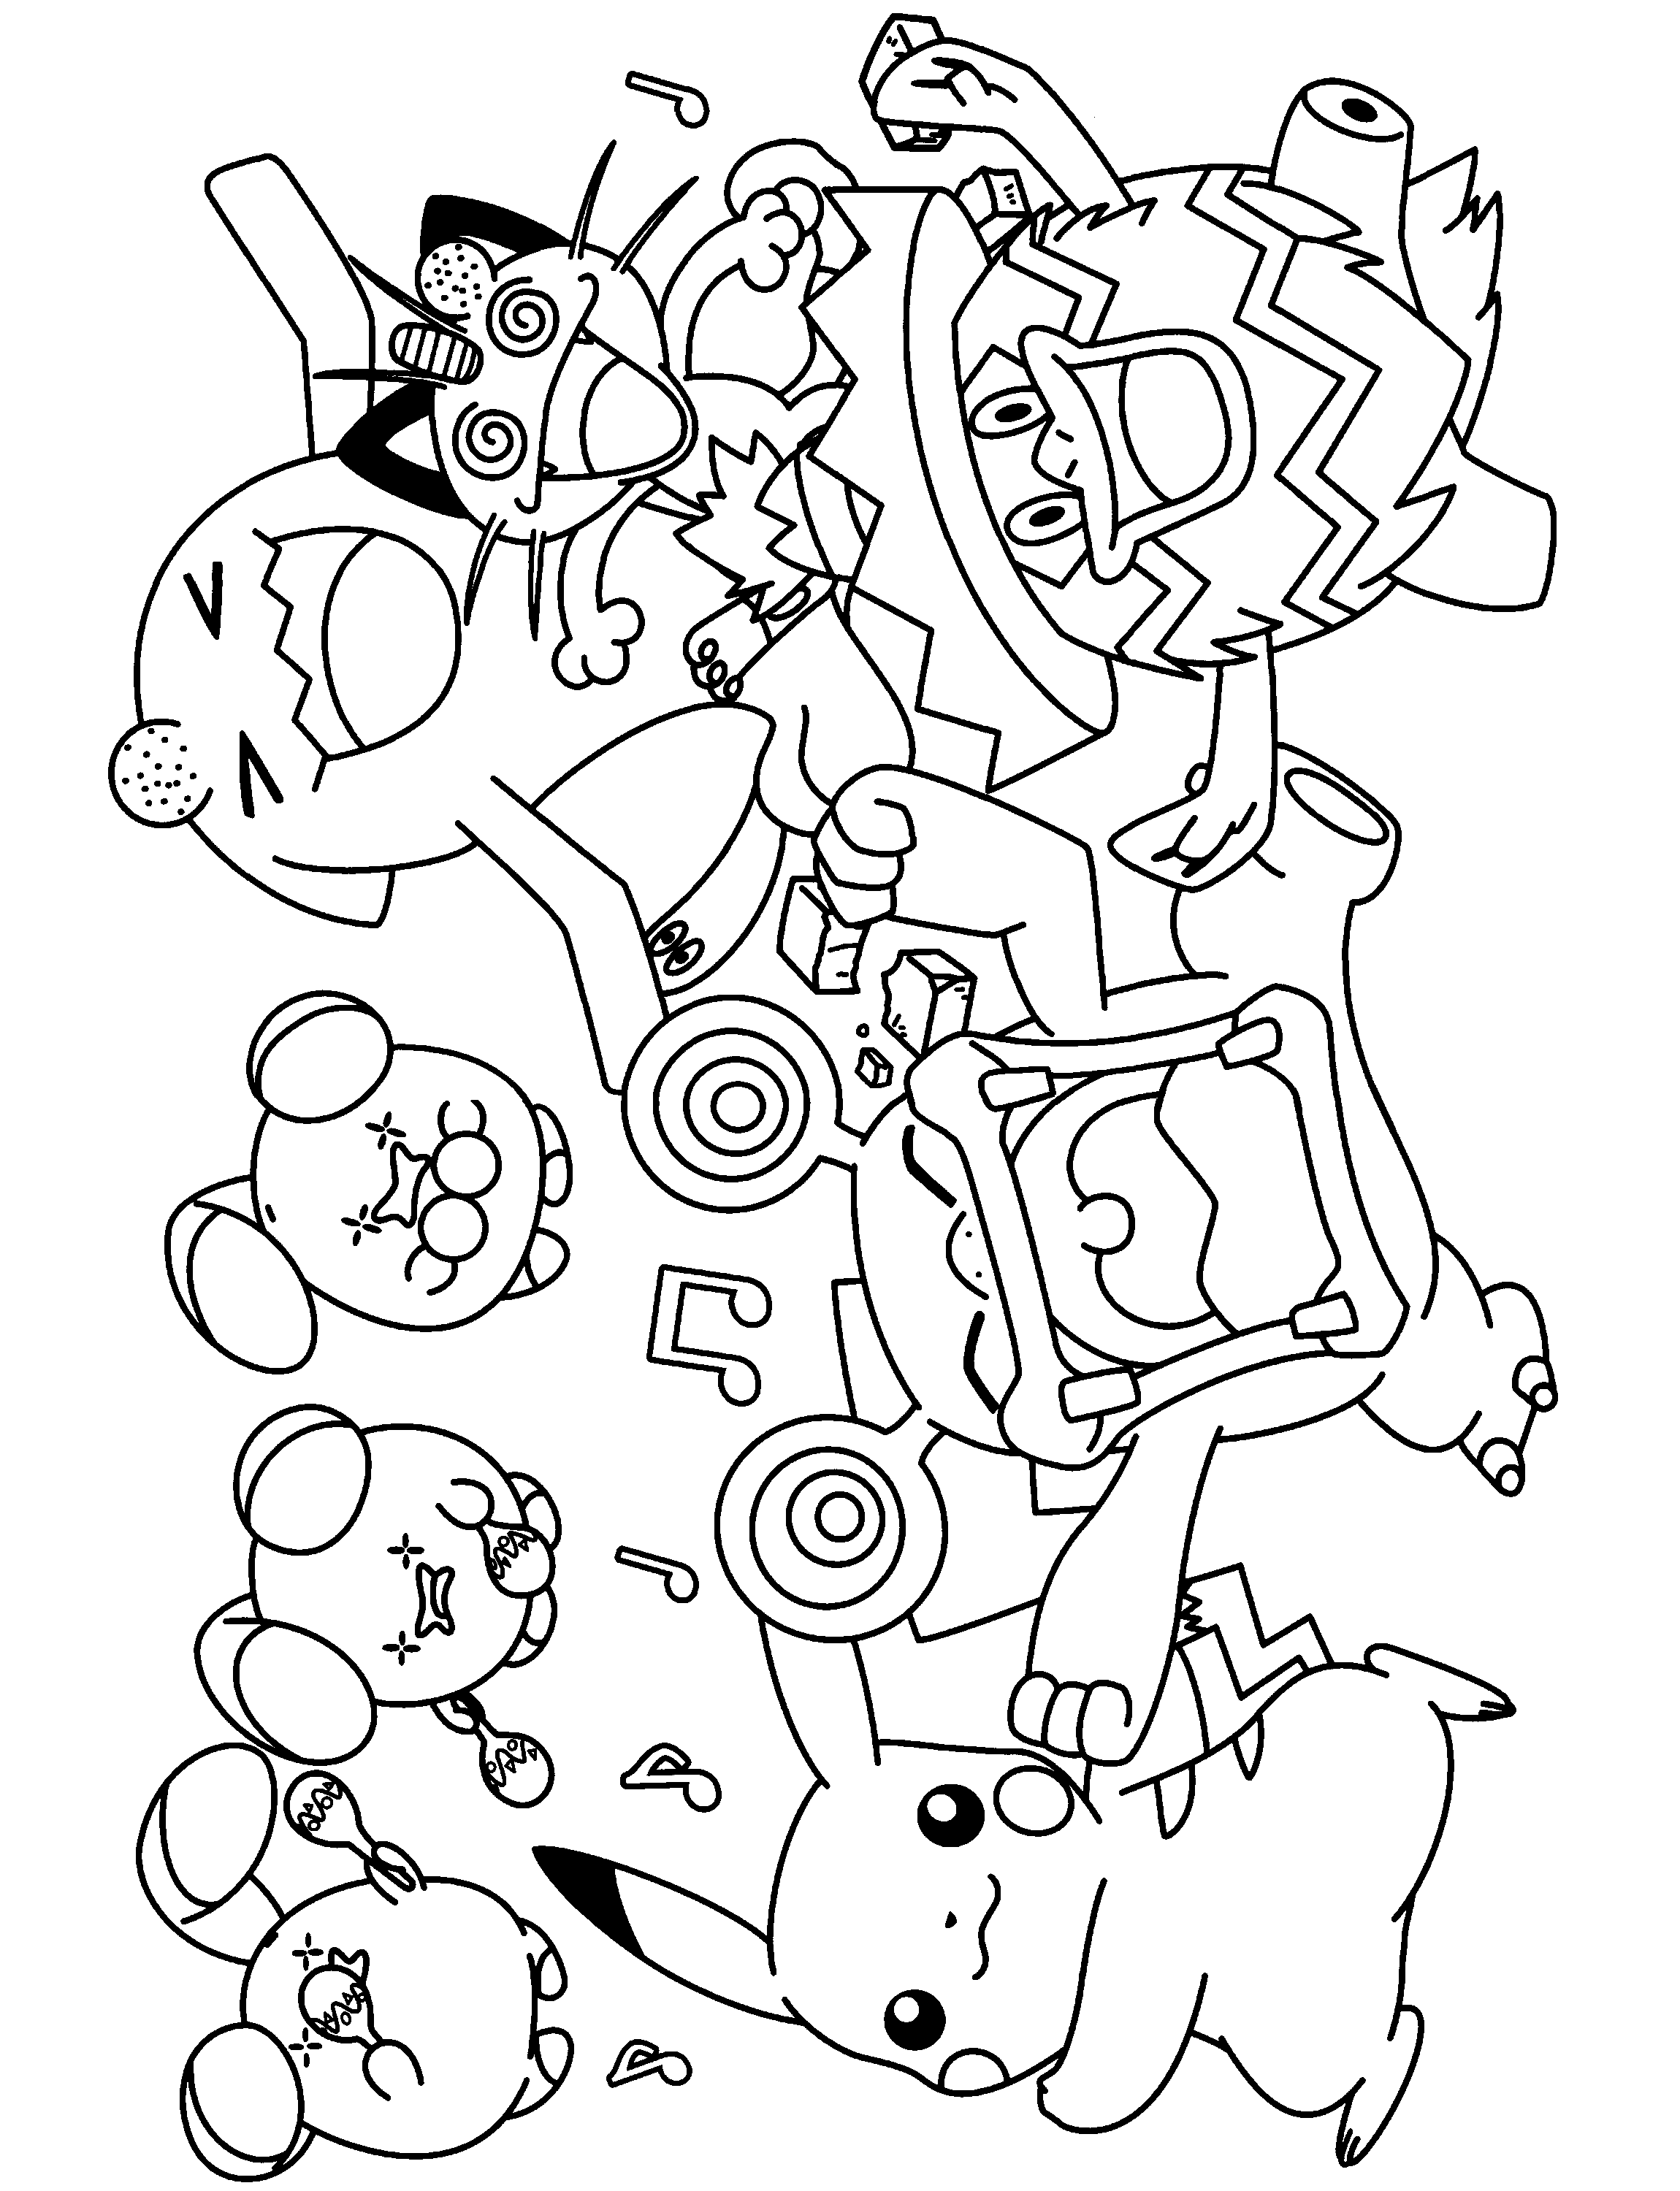 Free Pokemon Coloring Pages For Adults Download Free Pokemon Coloring Pages For Adults Png 